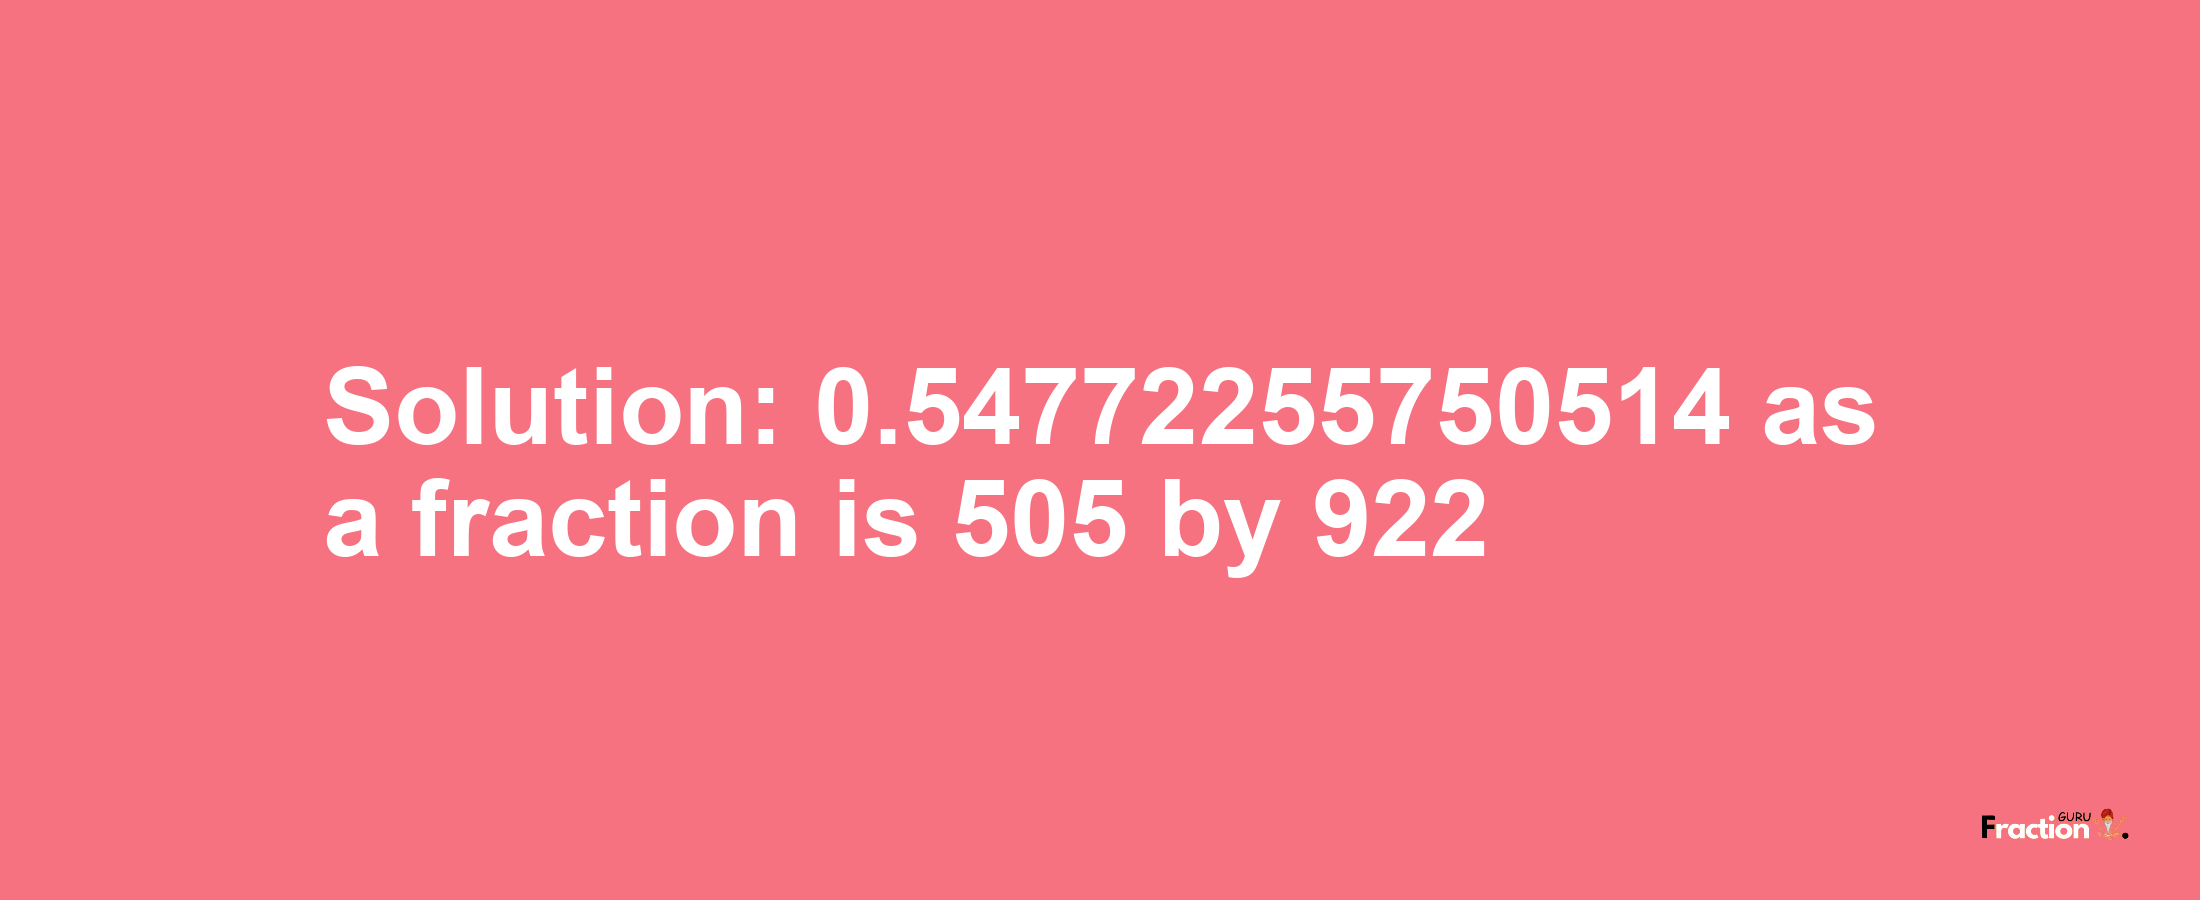 Solution:0.54772255750514 as a fraction is 505/922